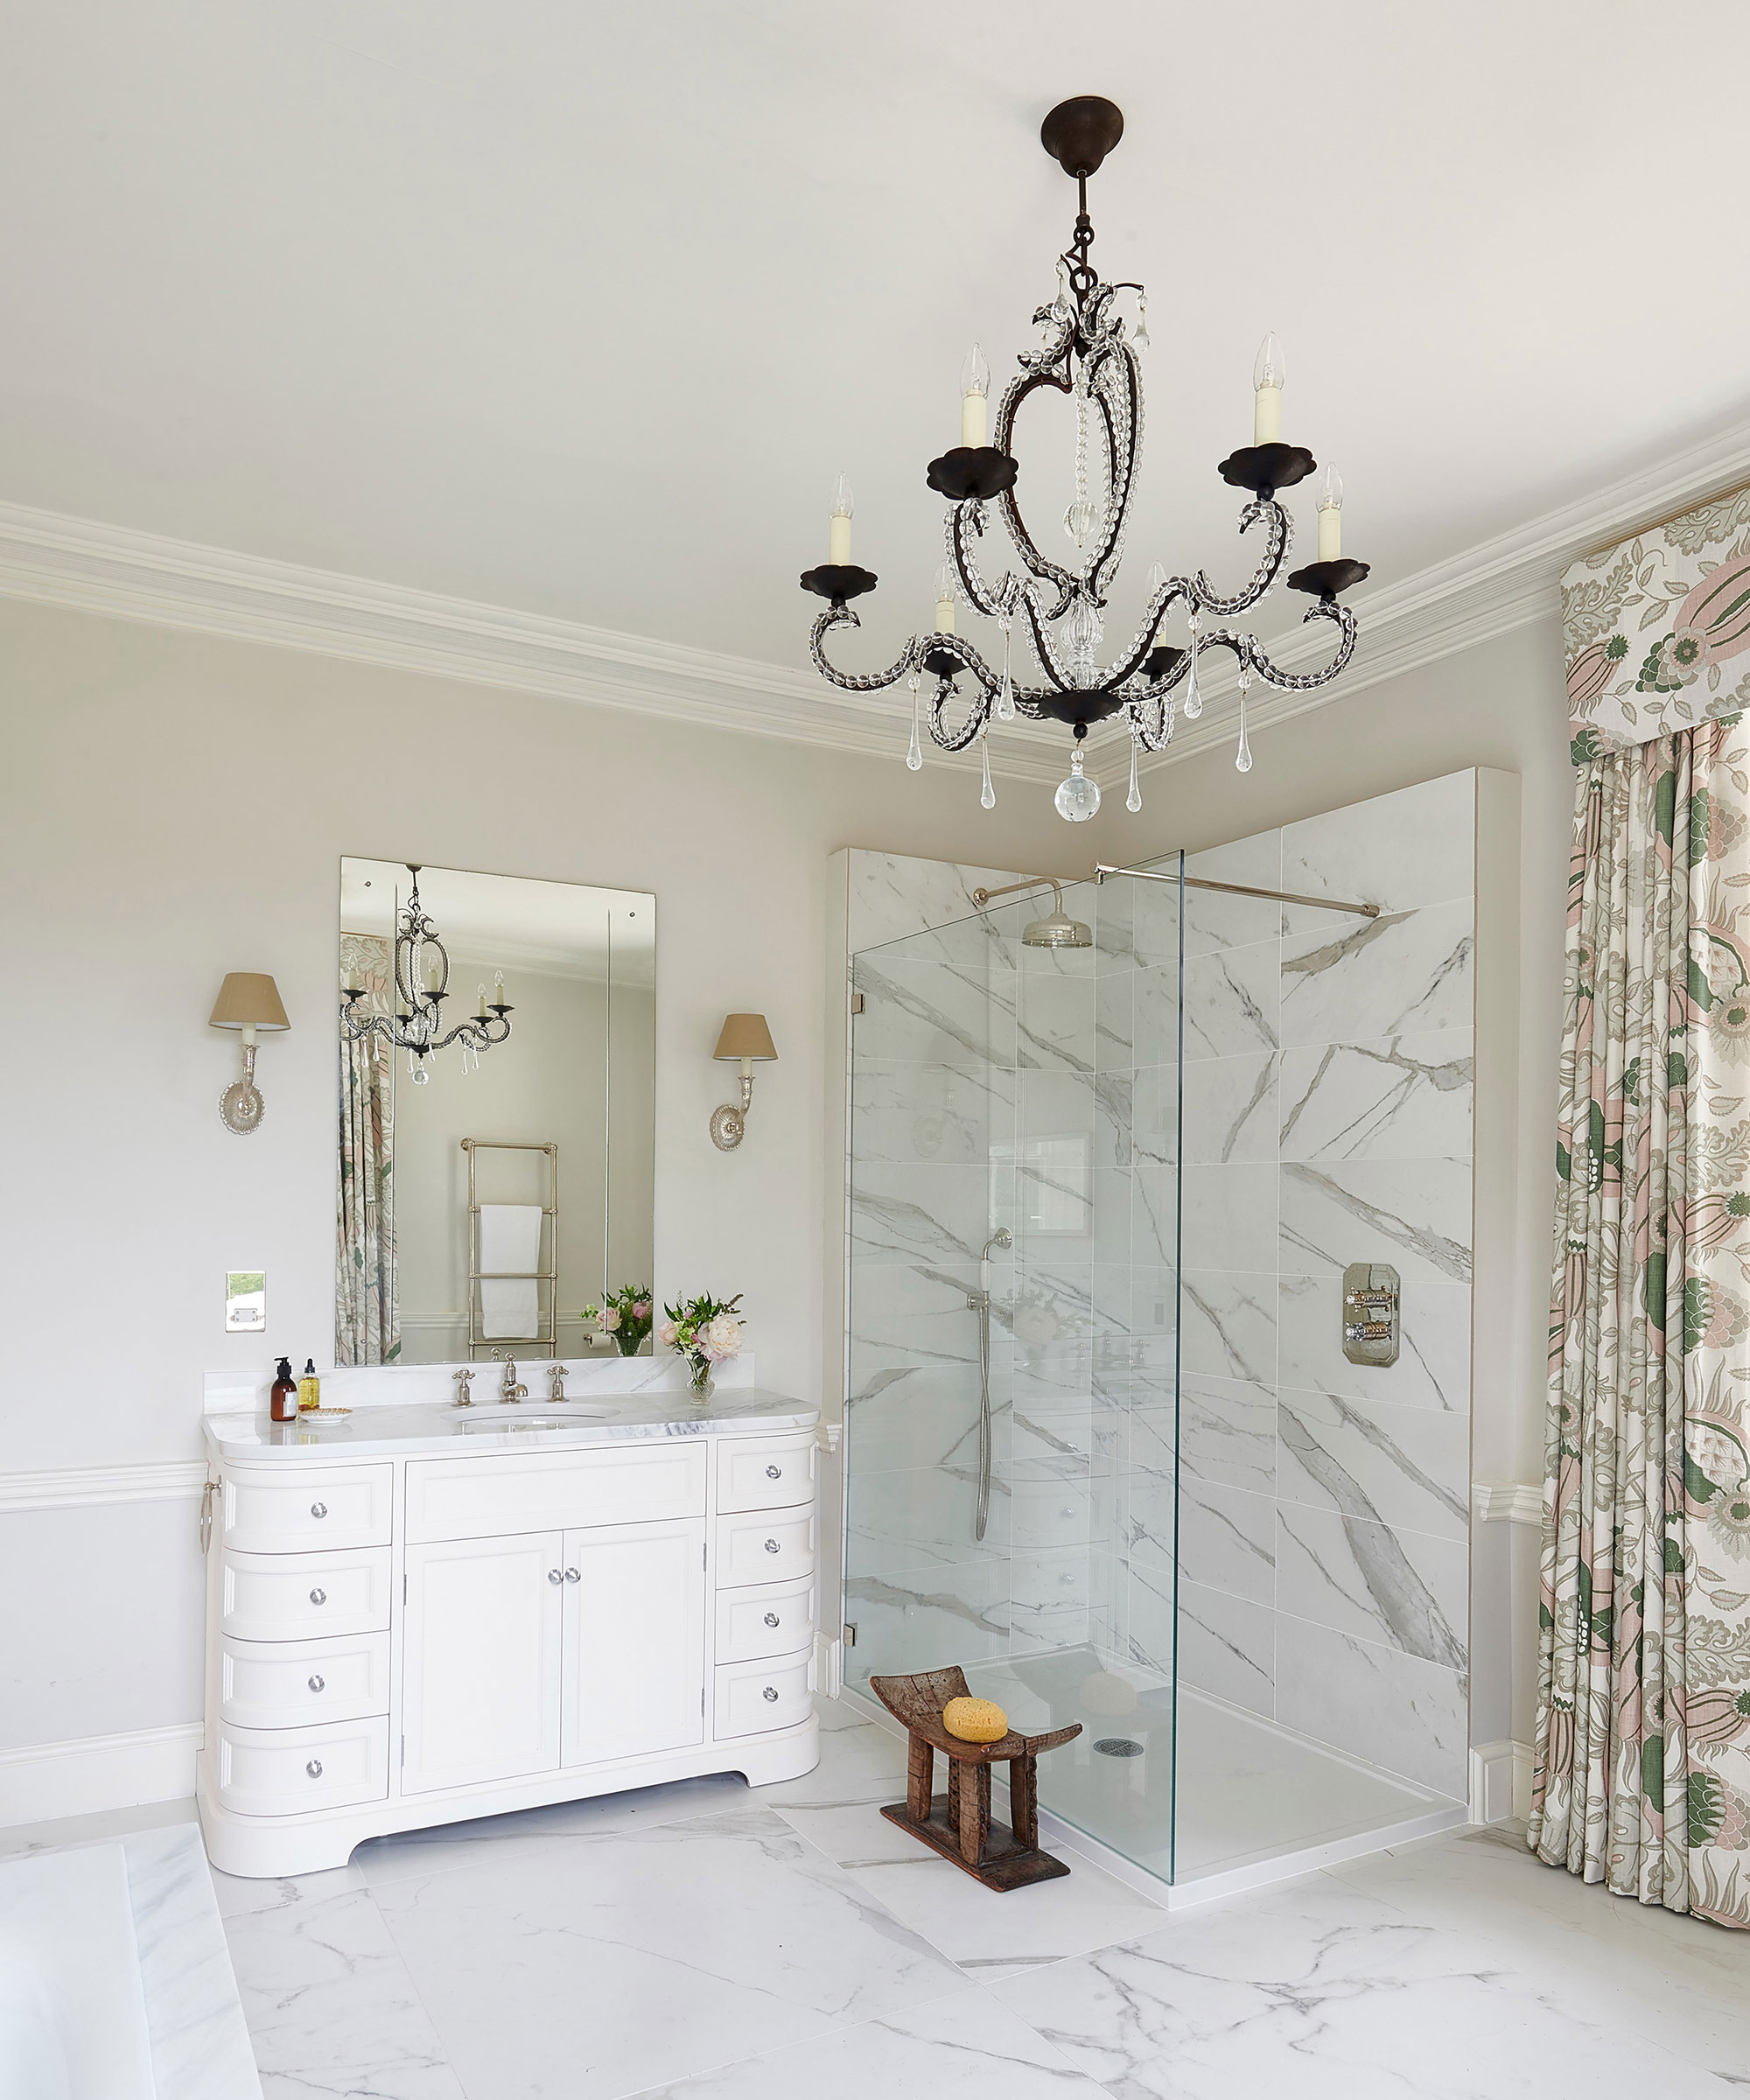 Bathroom lighting trends: From statement pendants to pretty sconces